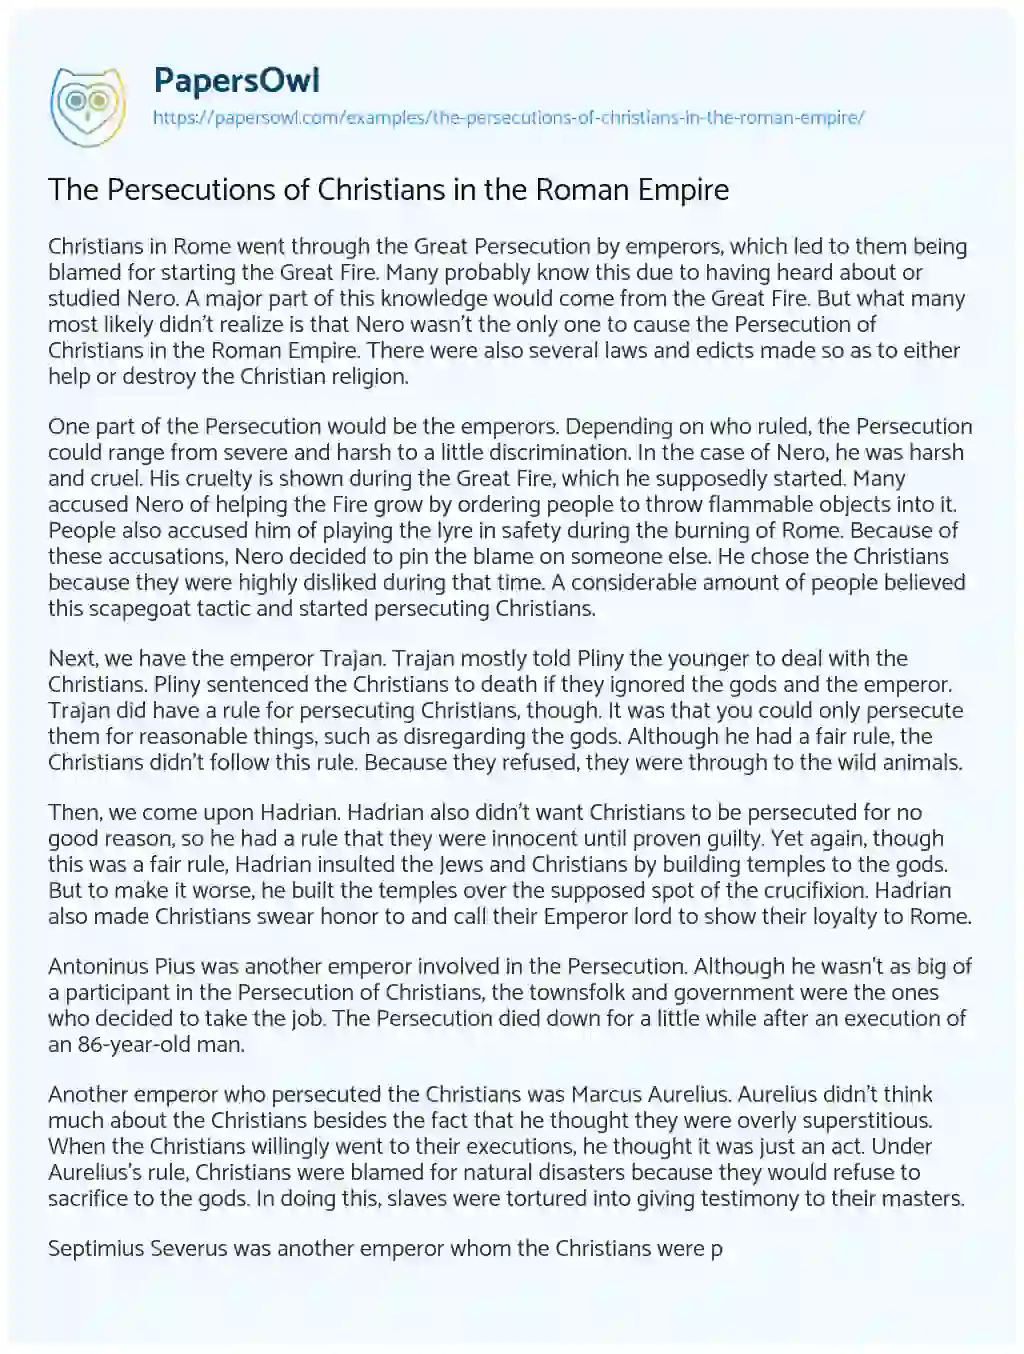 The Persecutions of Christians in the Roman Empire essay